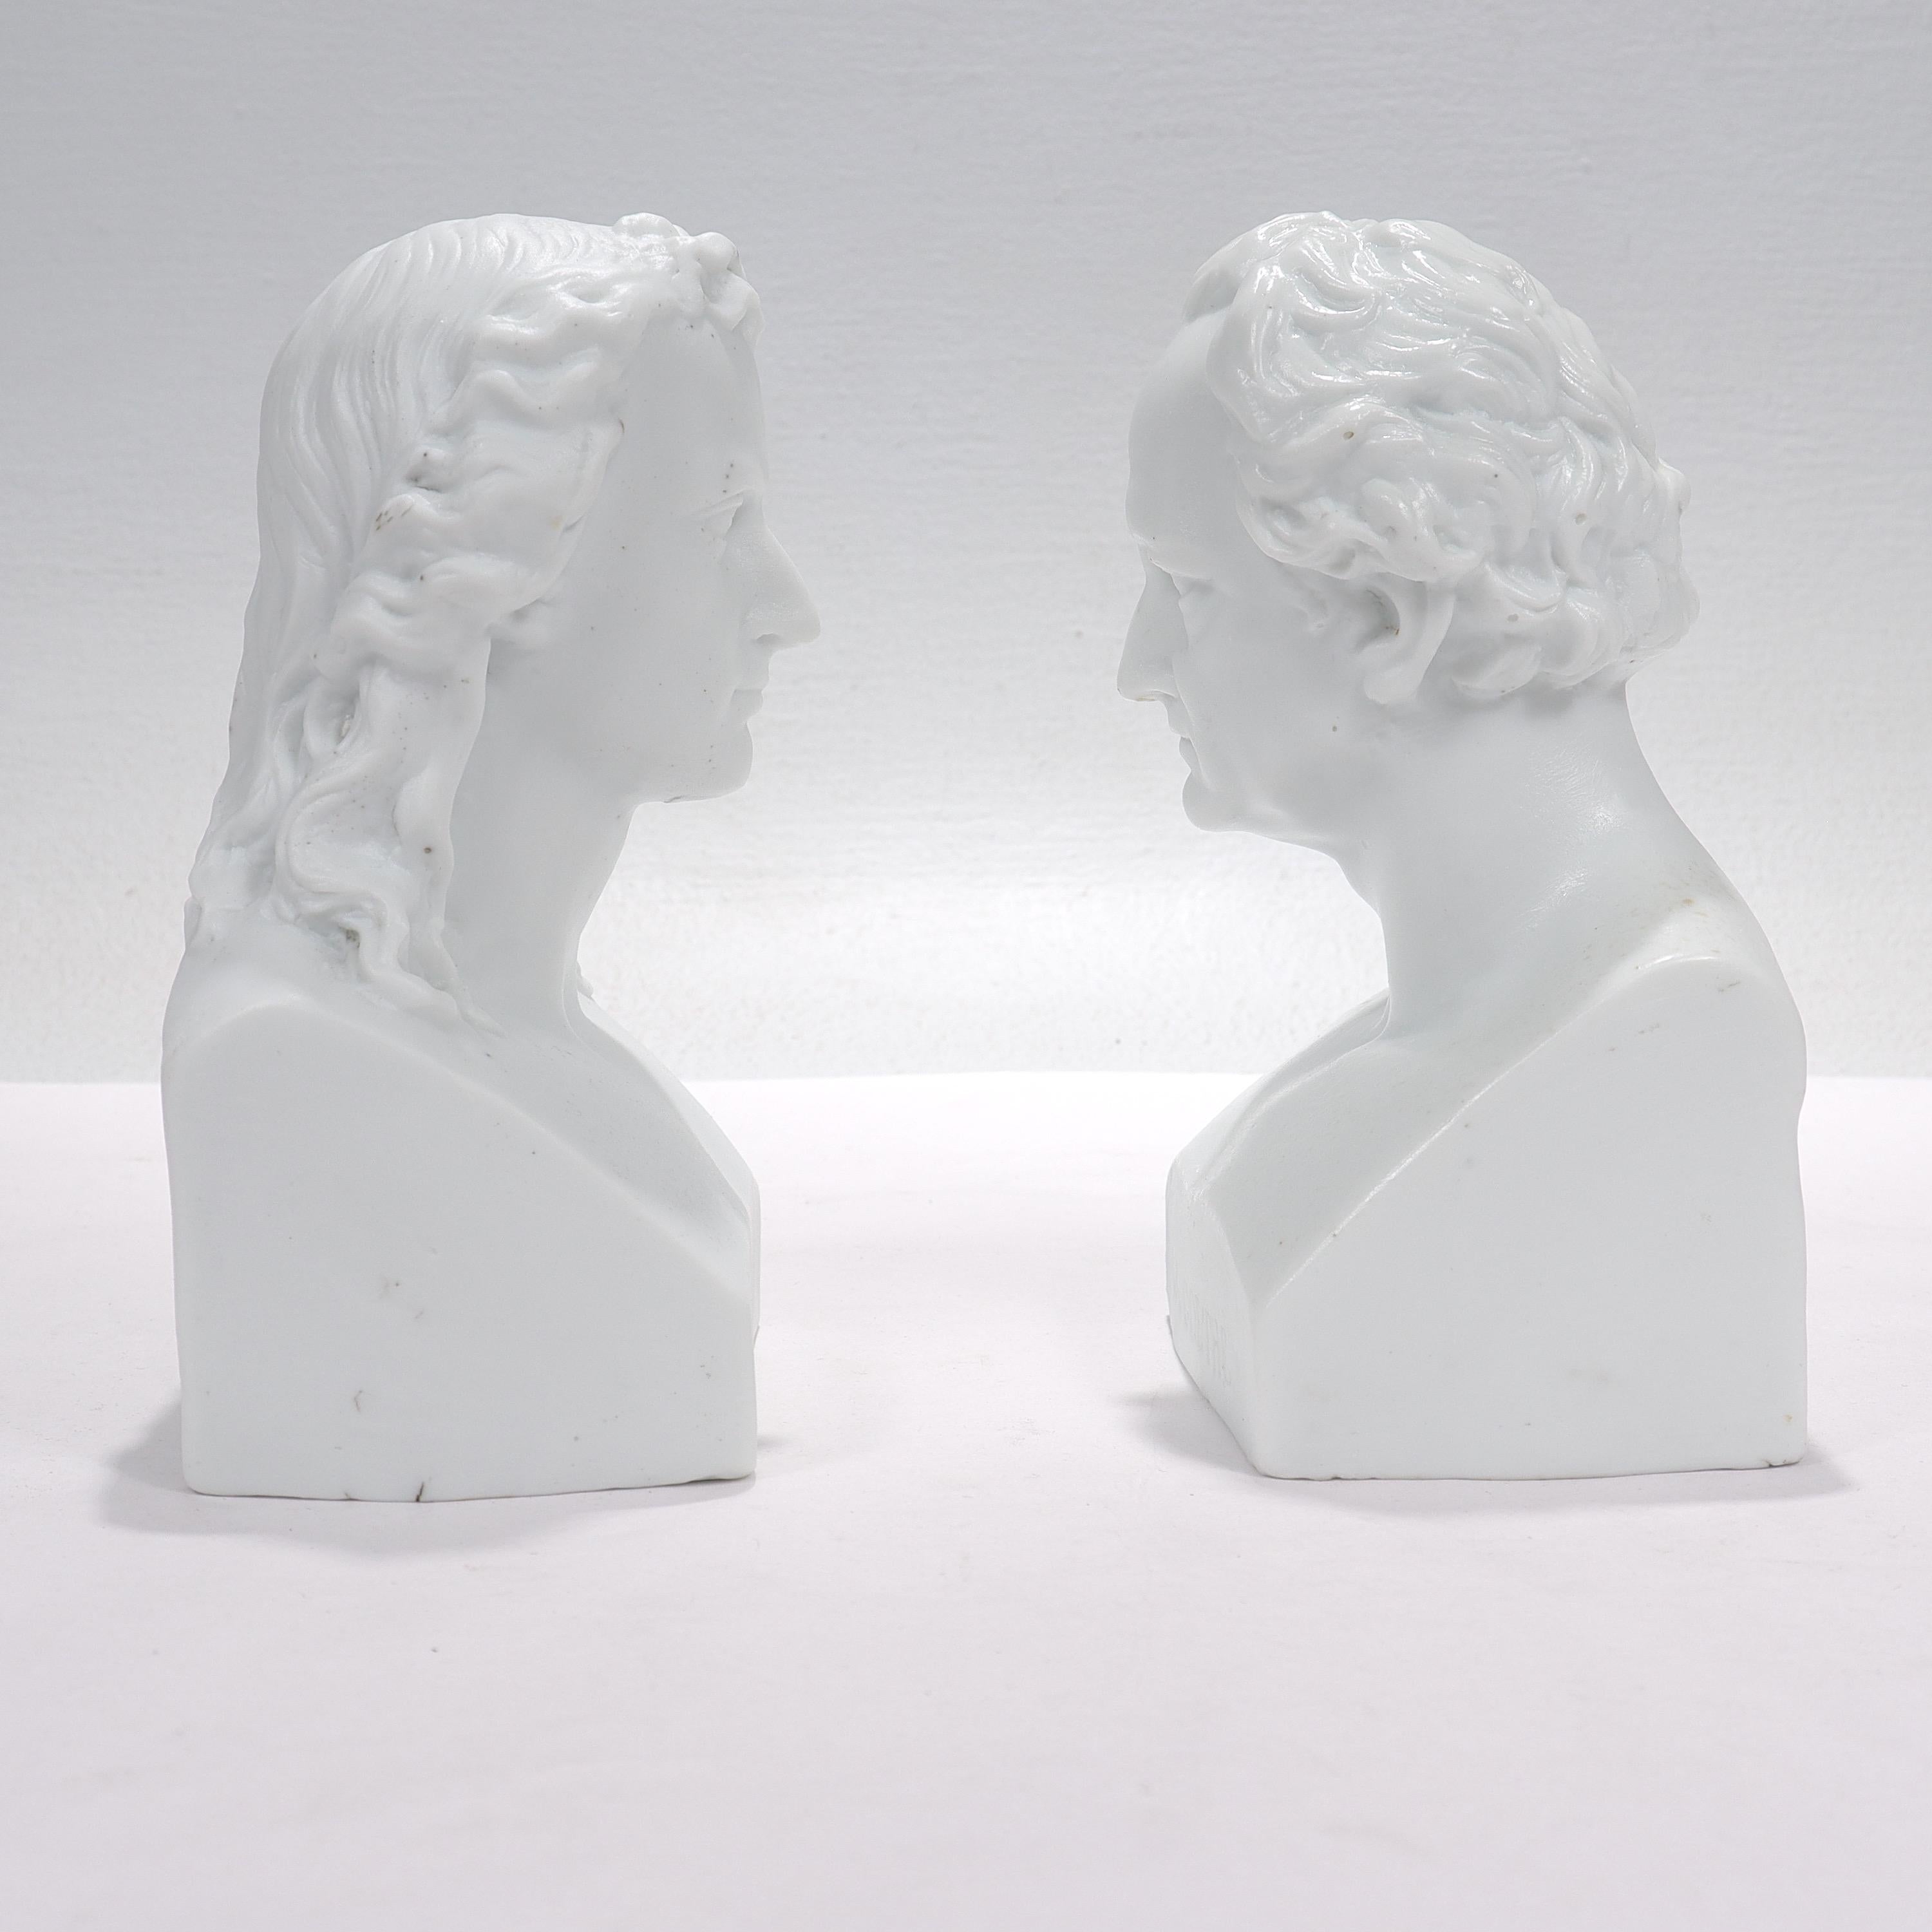 19th Century Antique Pair of Victorian Parian or Bisque Porcelain Busts of Schiller & Goethe  For Sale